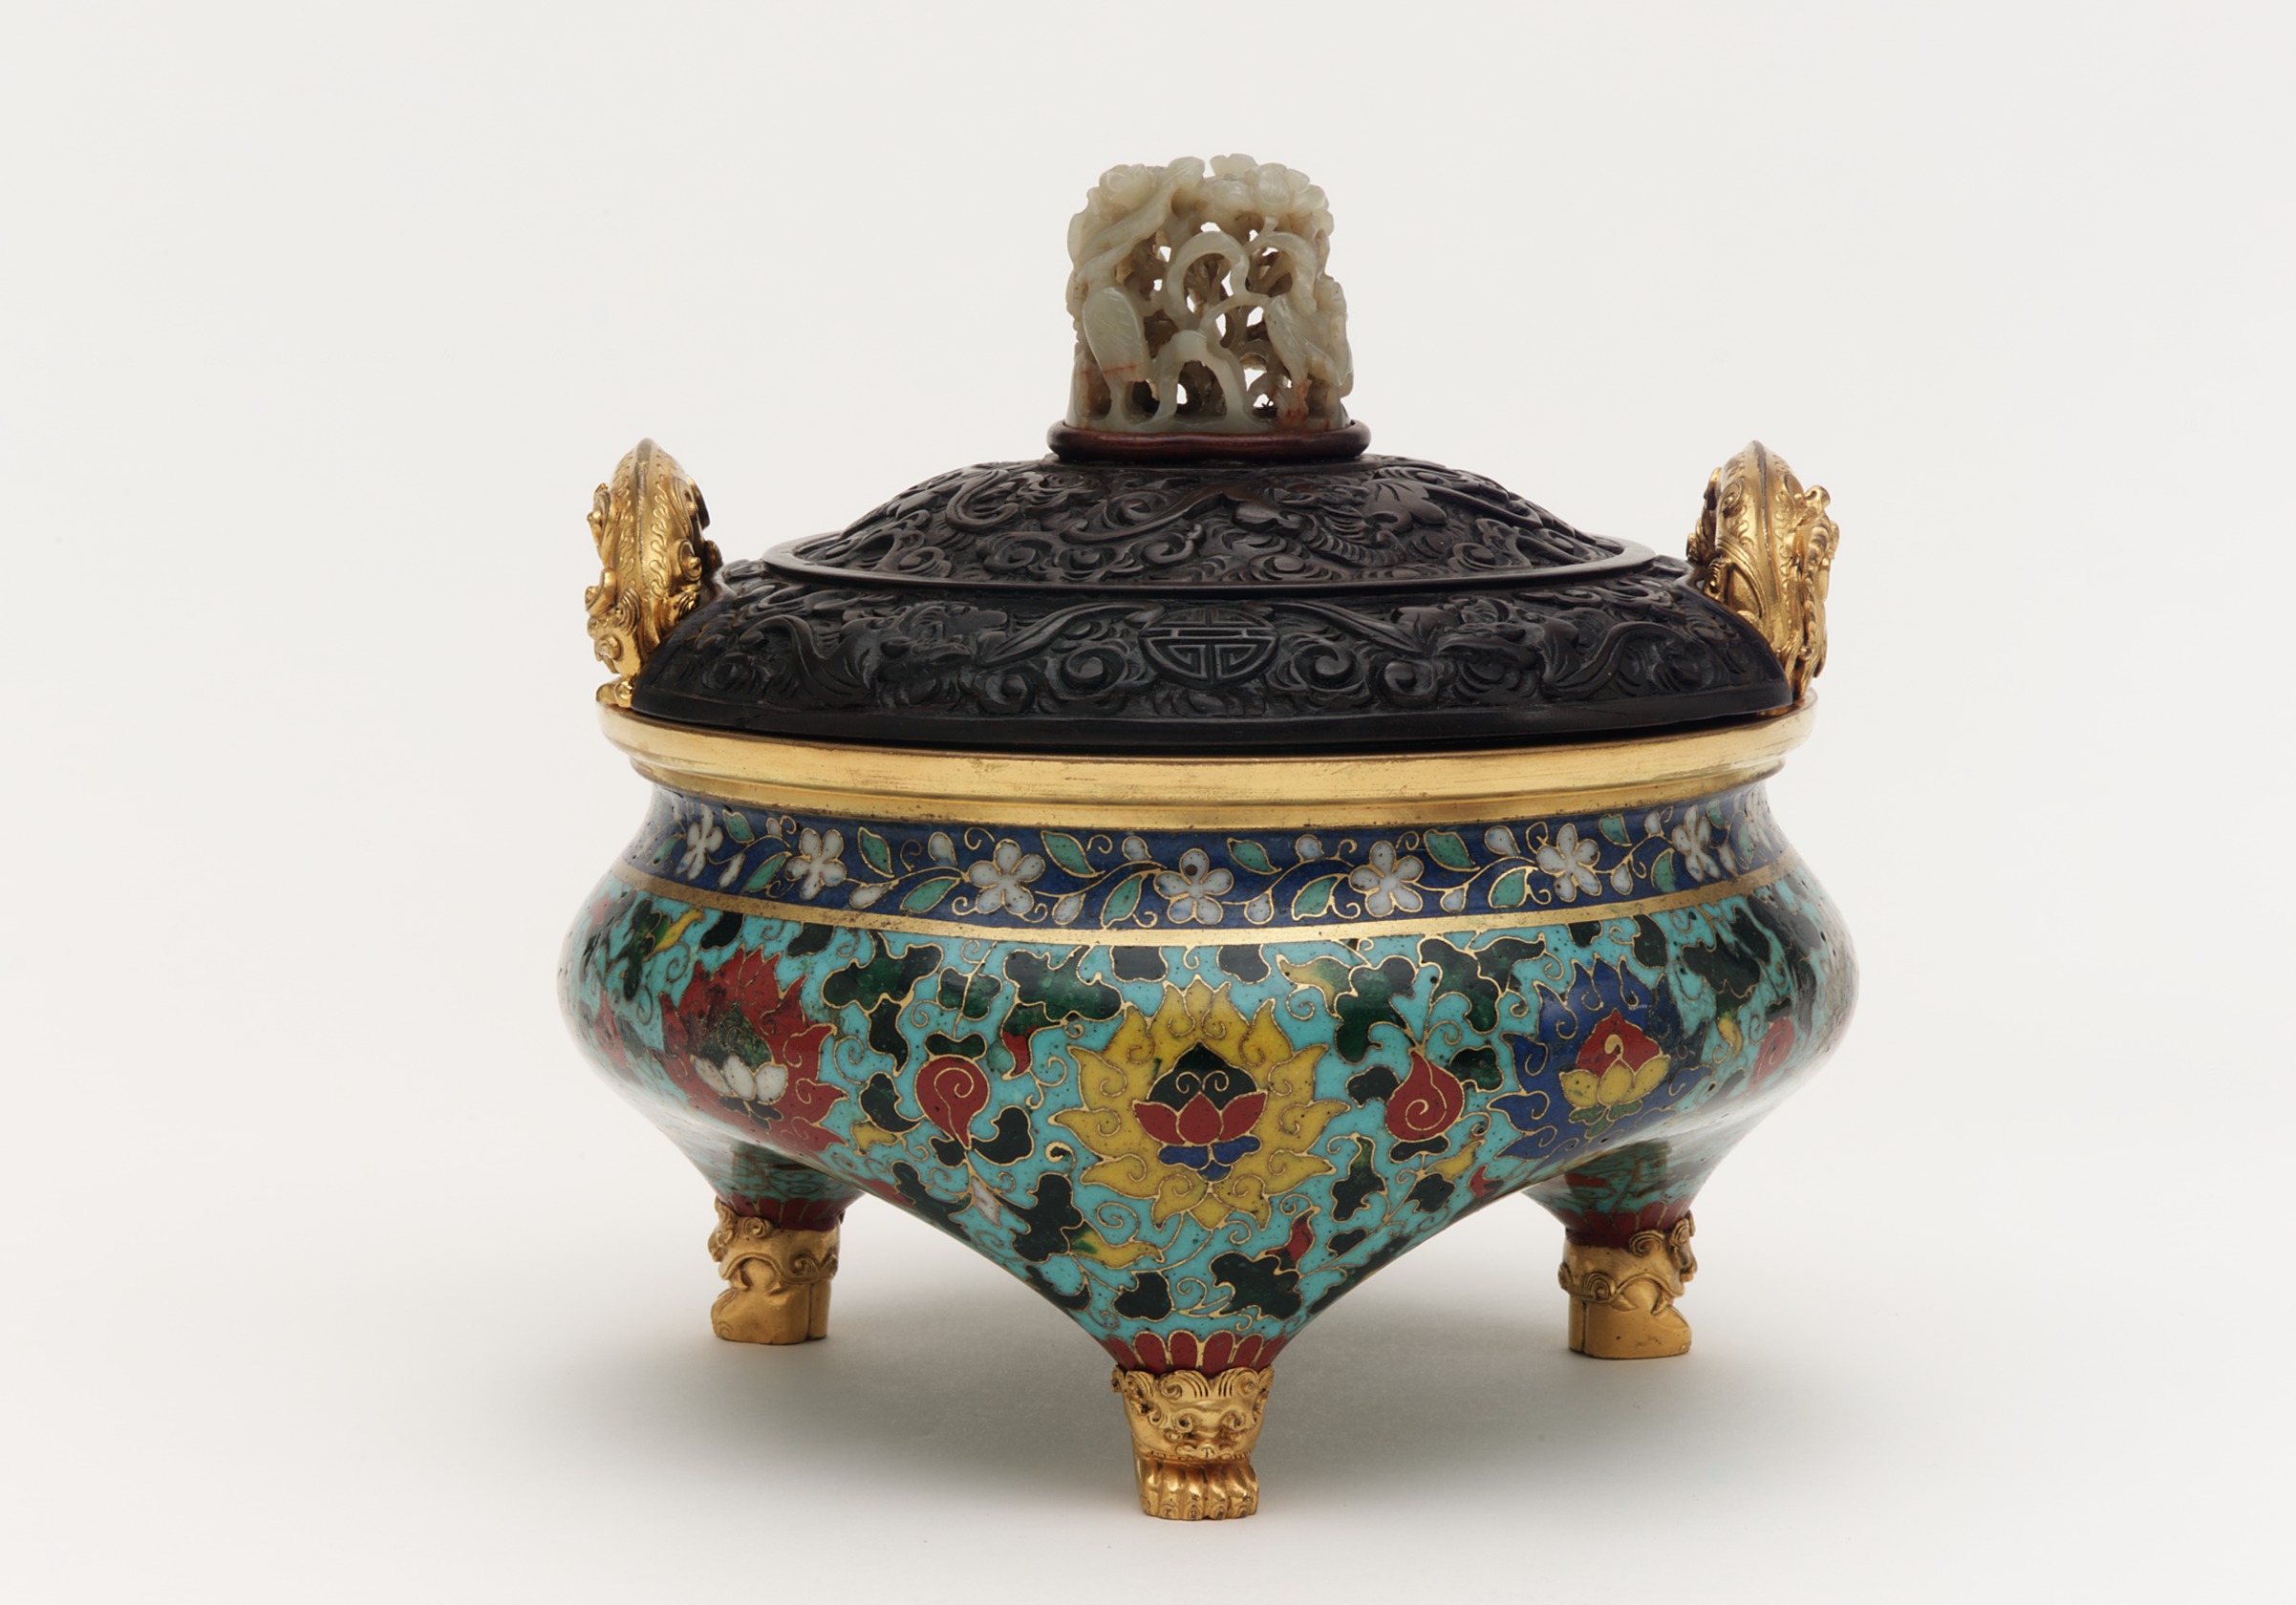 highly decorative bowl with lid